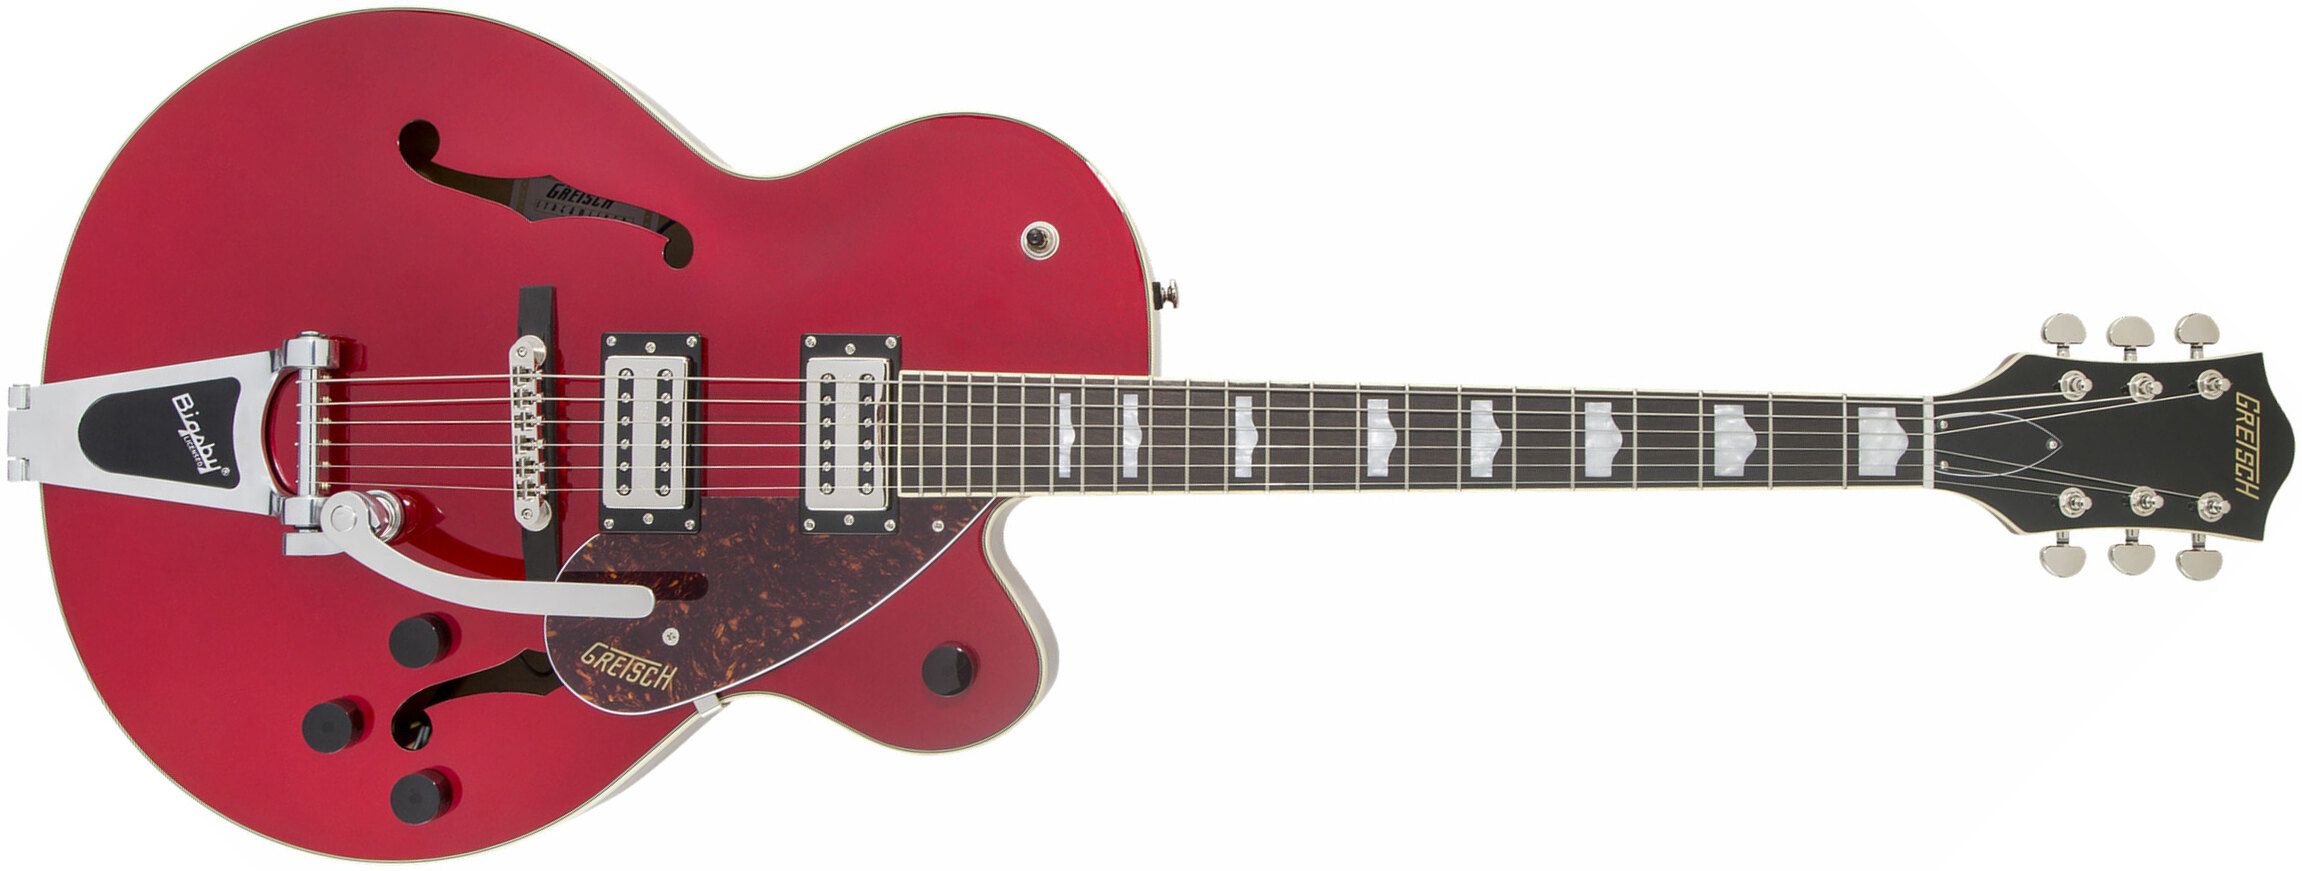 Gretsch G2420t Streamliner Hollow Body Bigsby Hh Trem Lau - Candy Apple Red - Guitarra eléctrica semi caja - Main picture